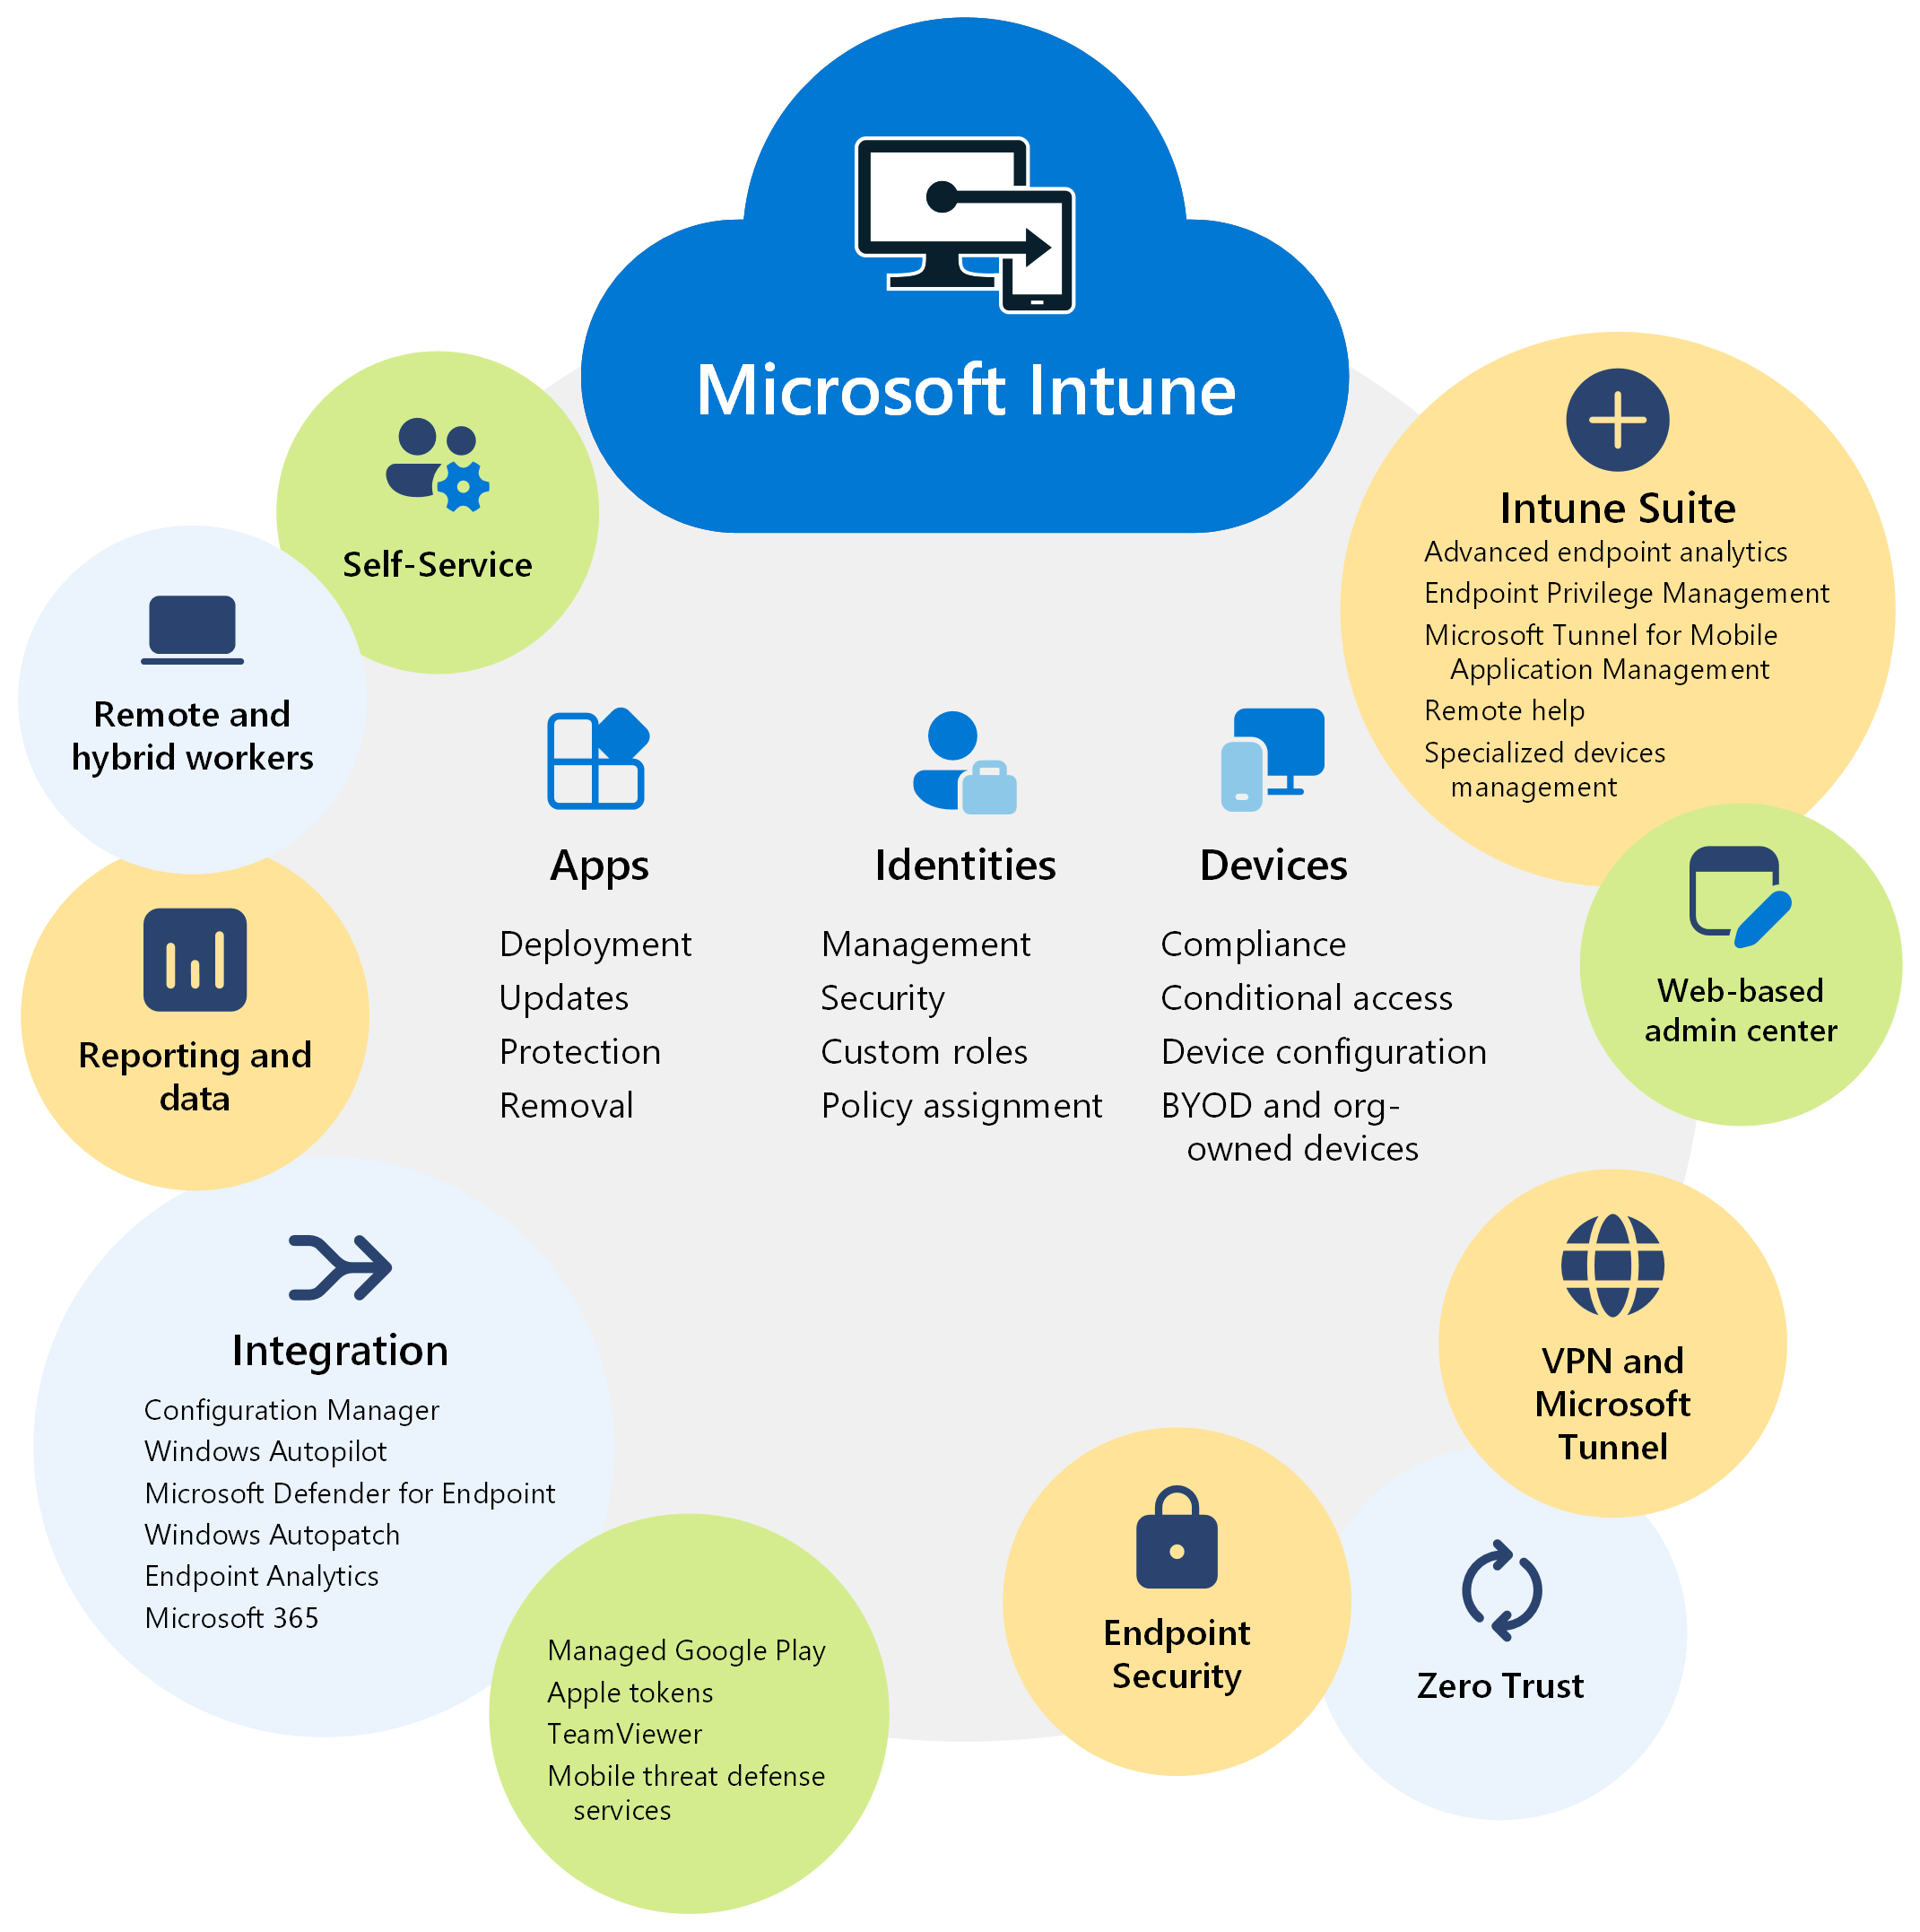 Image that shows features and benefits of Microsoft Intune.